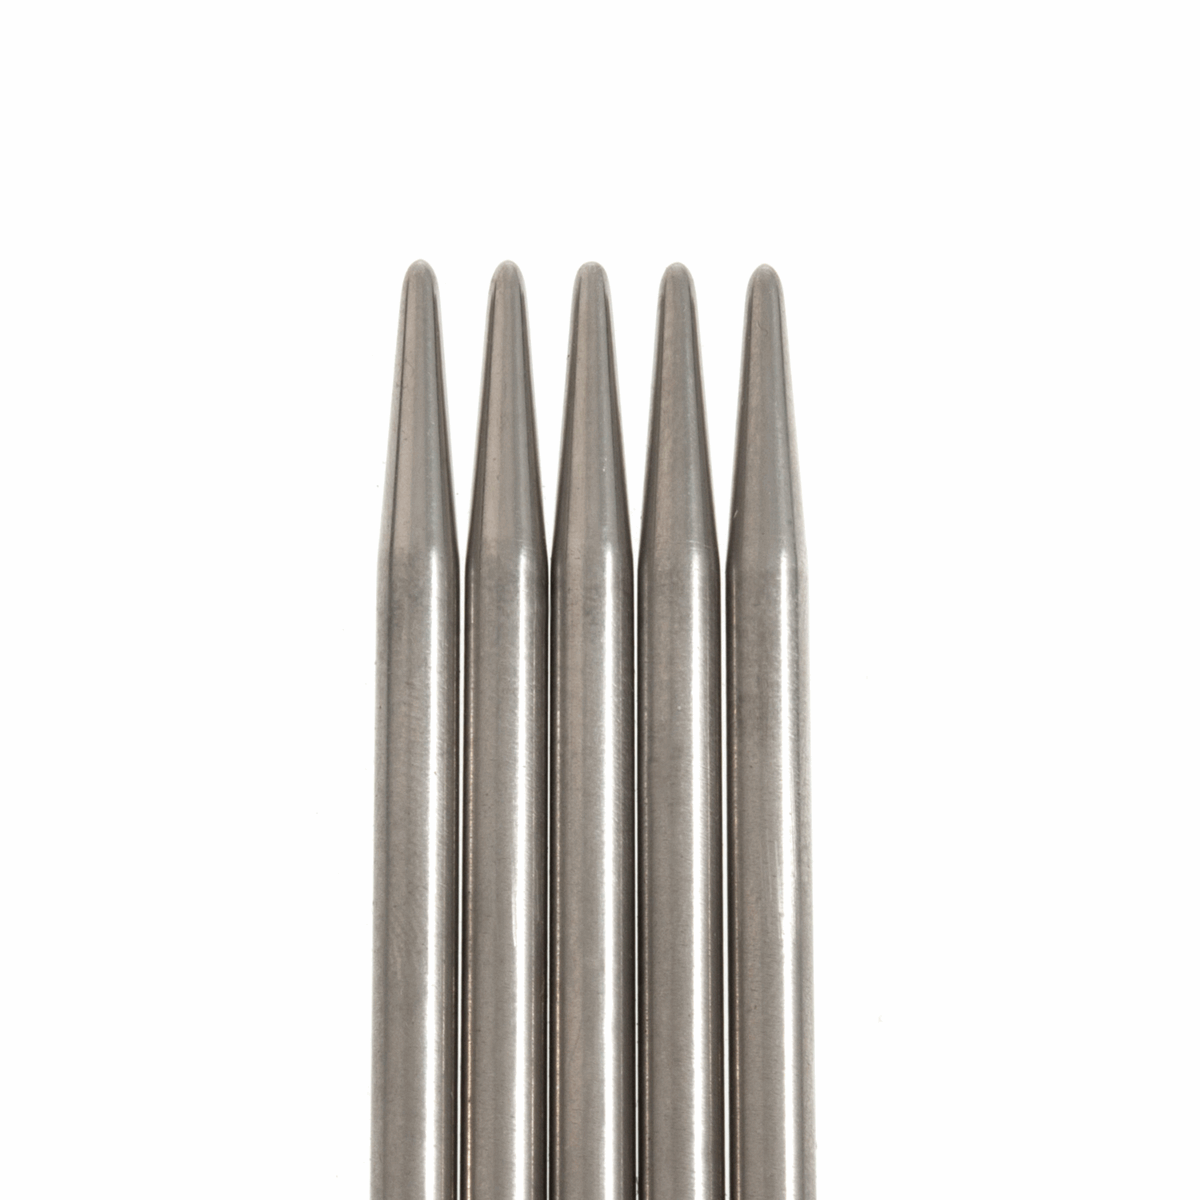 PONY 'Elan' Double-Ended Stainless Steel Knitting Pins - 20cm x 4.00mm (Set of 5)